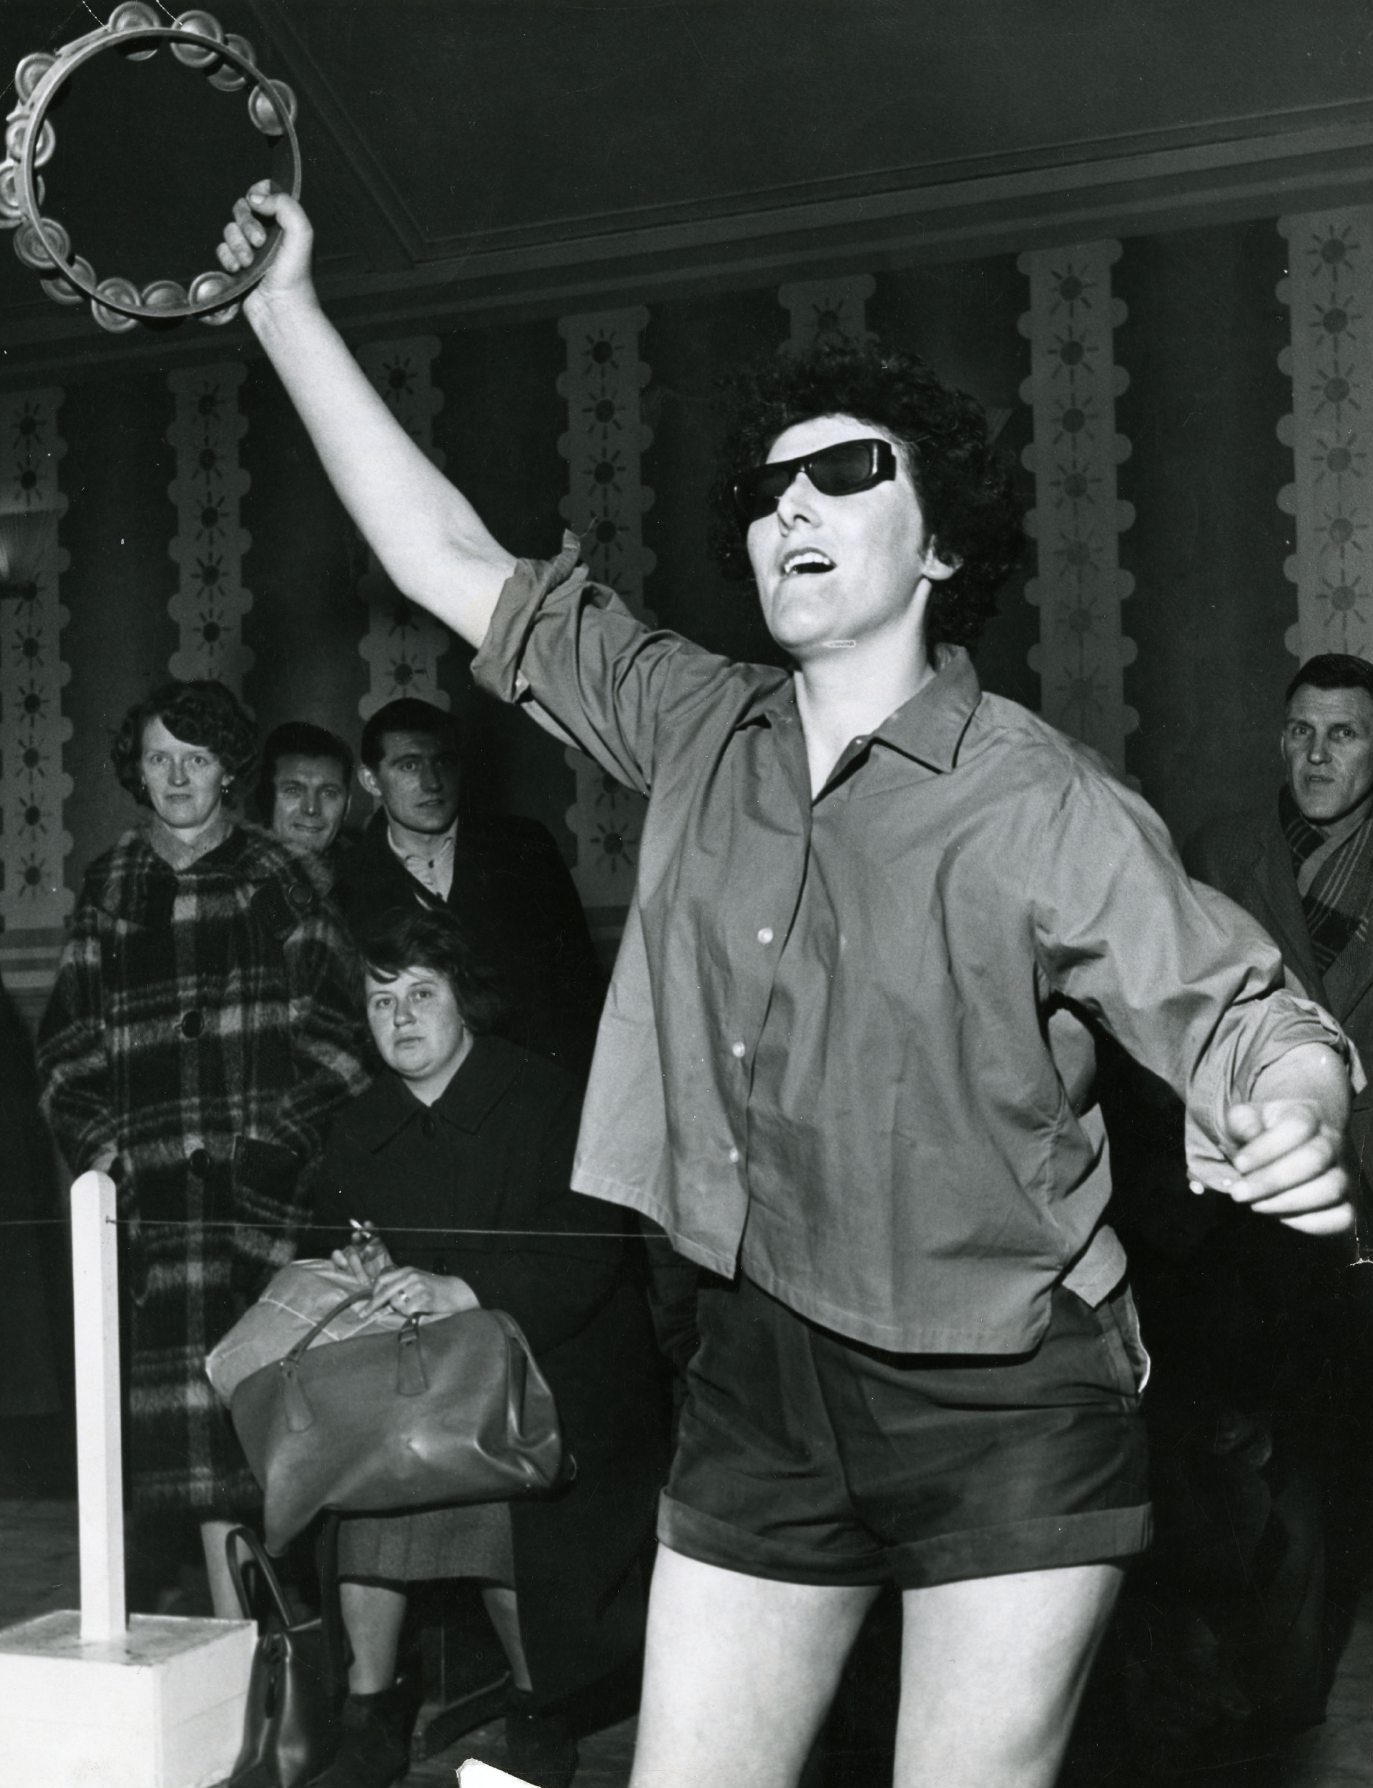 Cathie Connelly in the Dundee twist marathon in 1964. Image: DC Thomson.